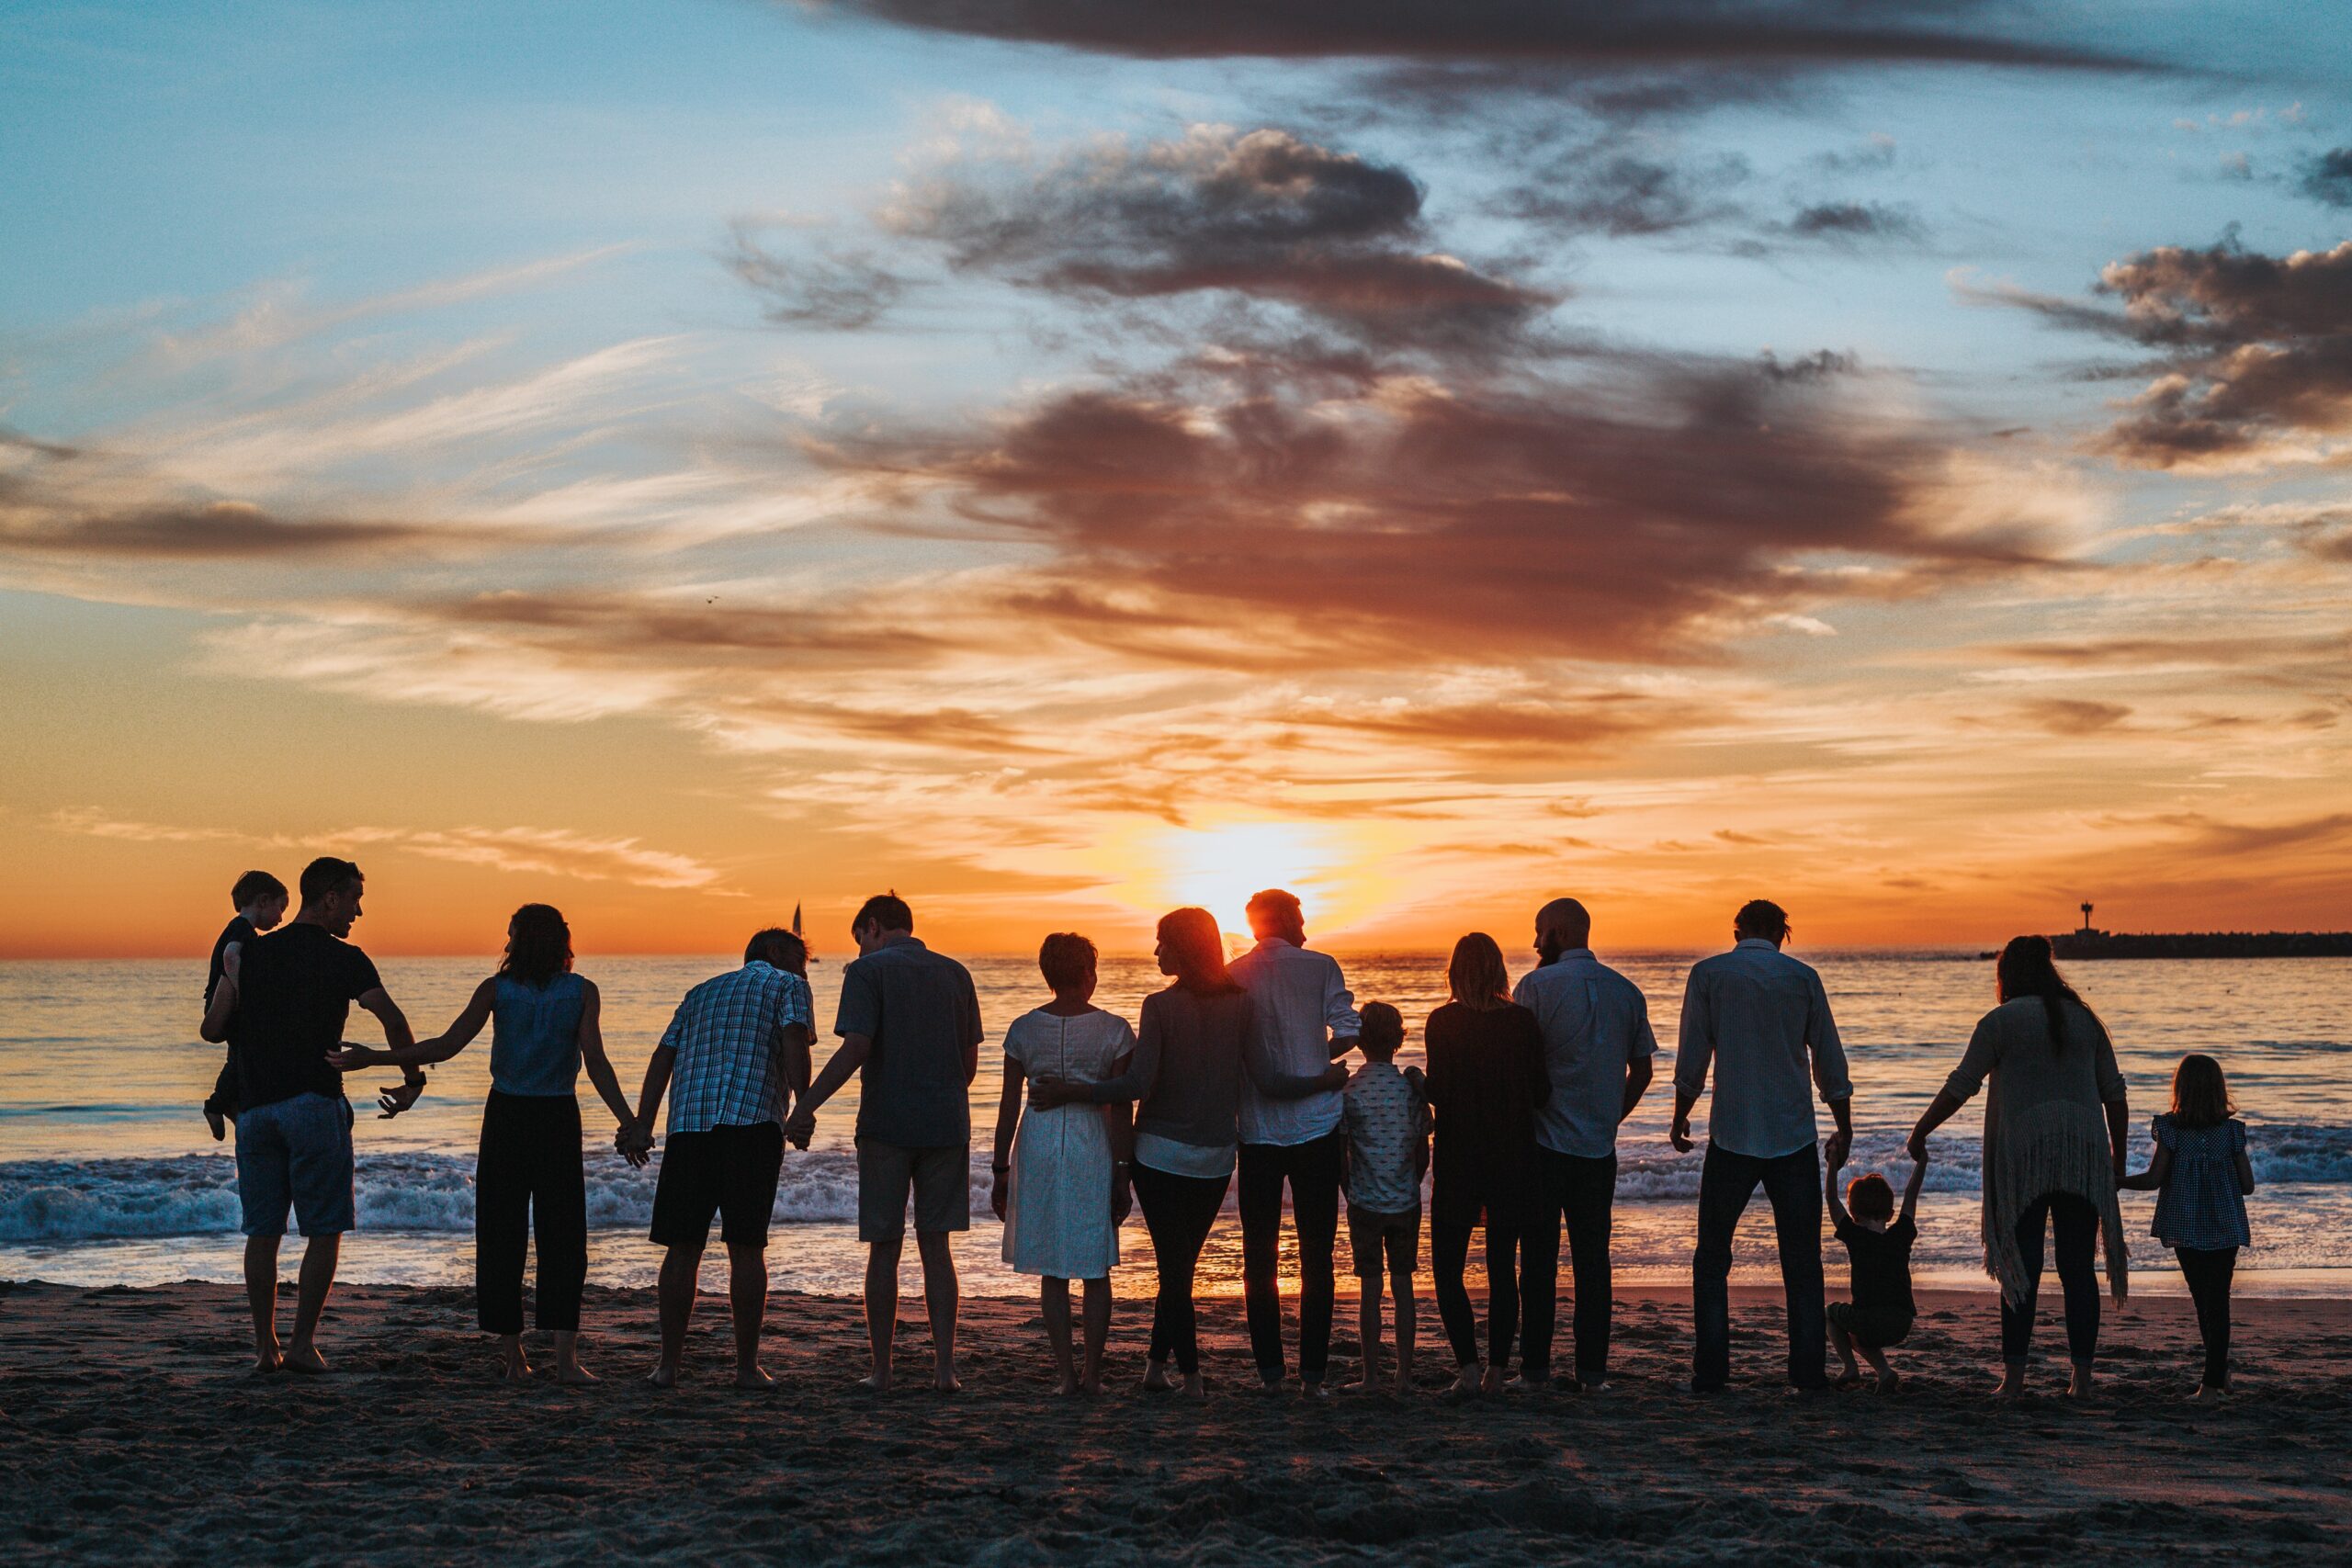 group of people holding hands and facing the ocean on a beach during sunset